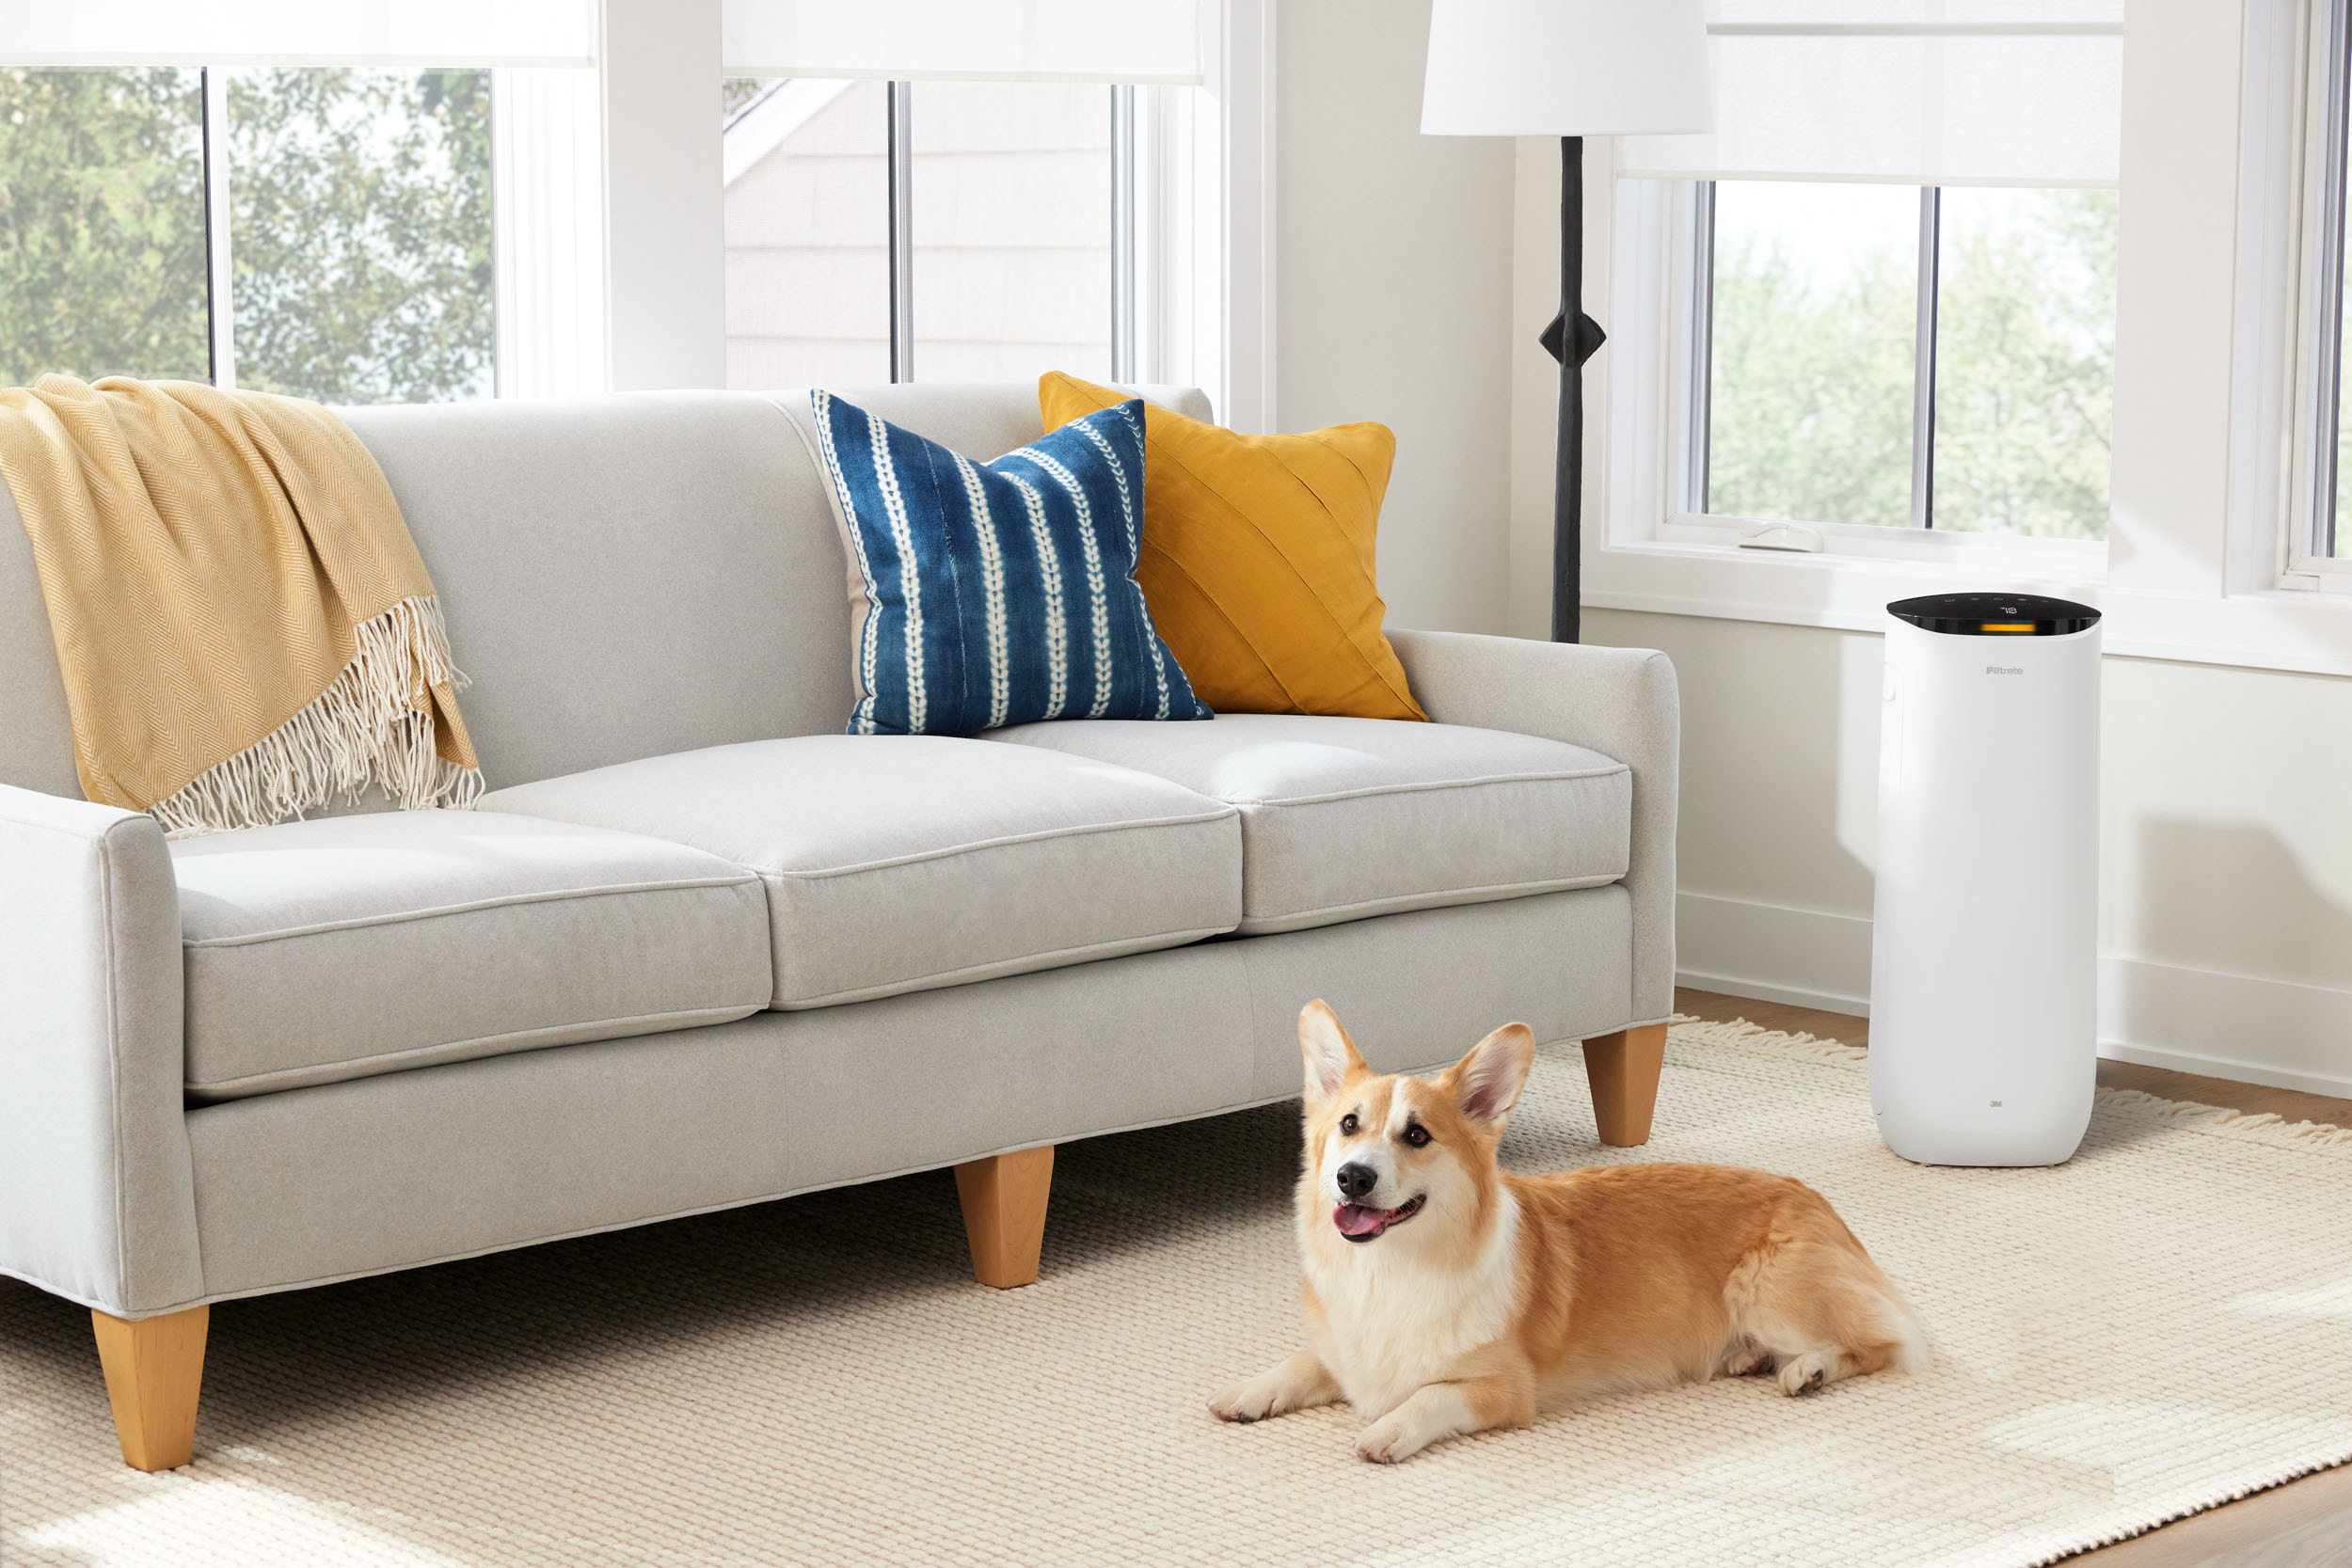 Corgi sitting next to couch and white tower air purifer